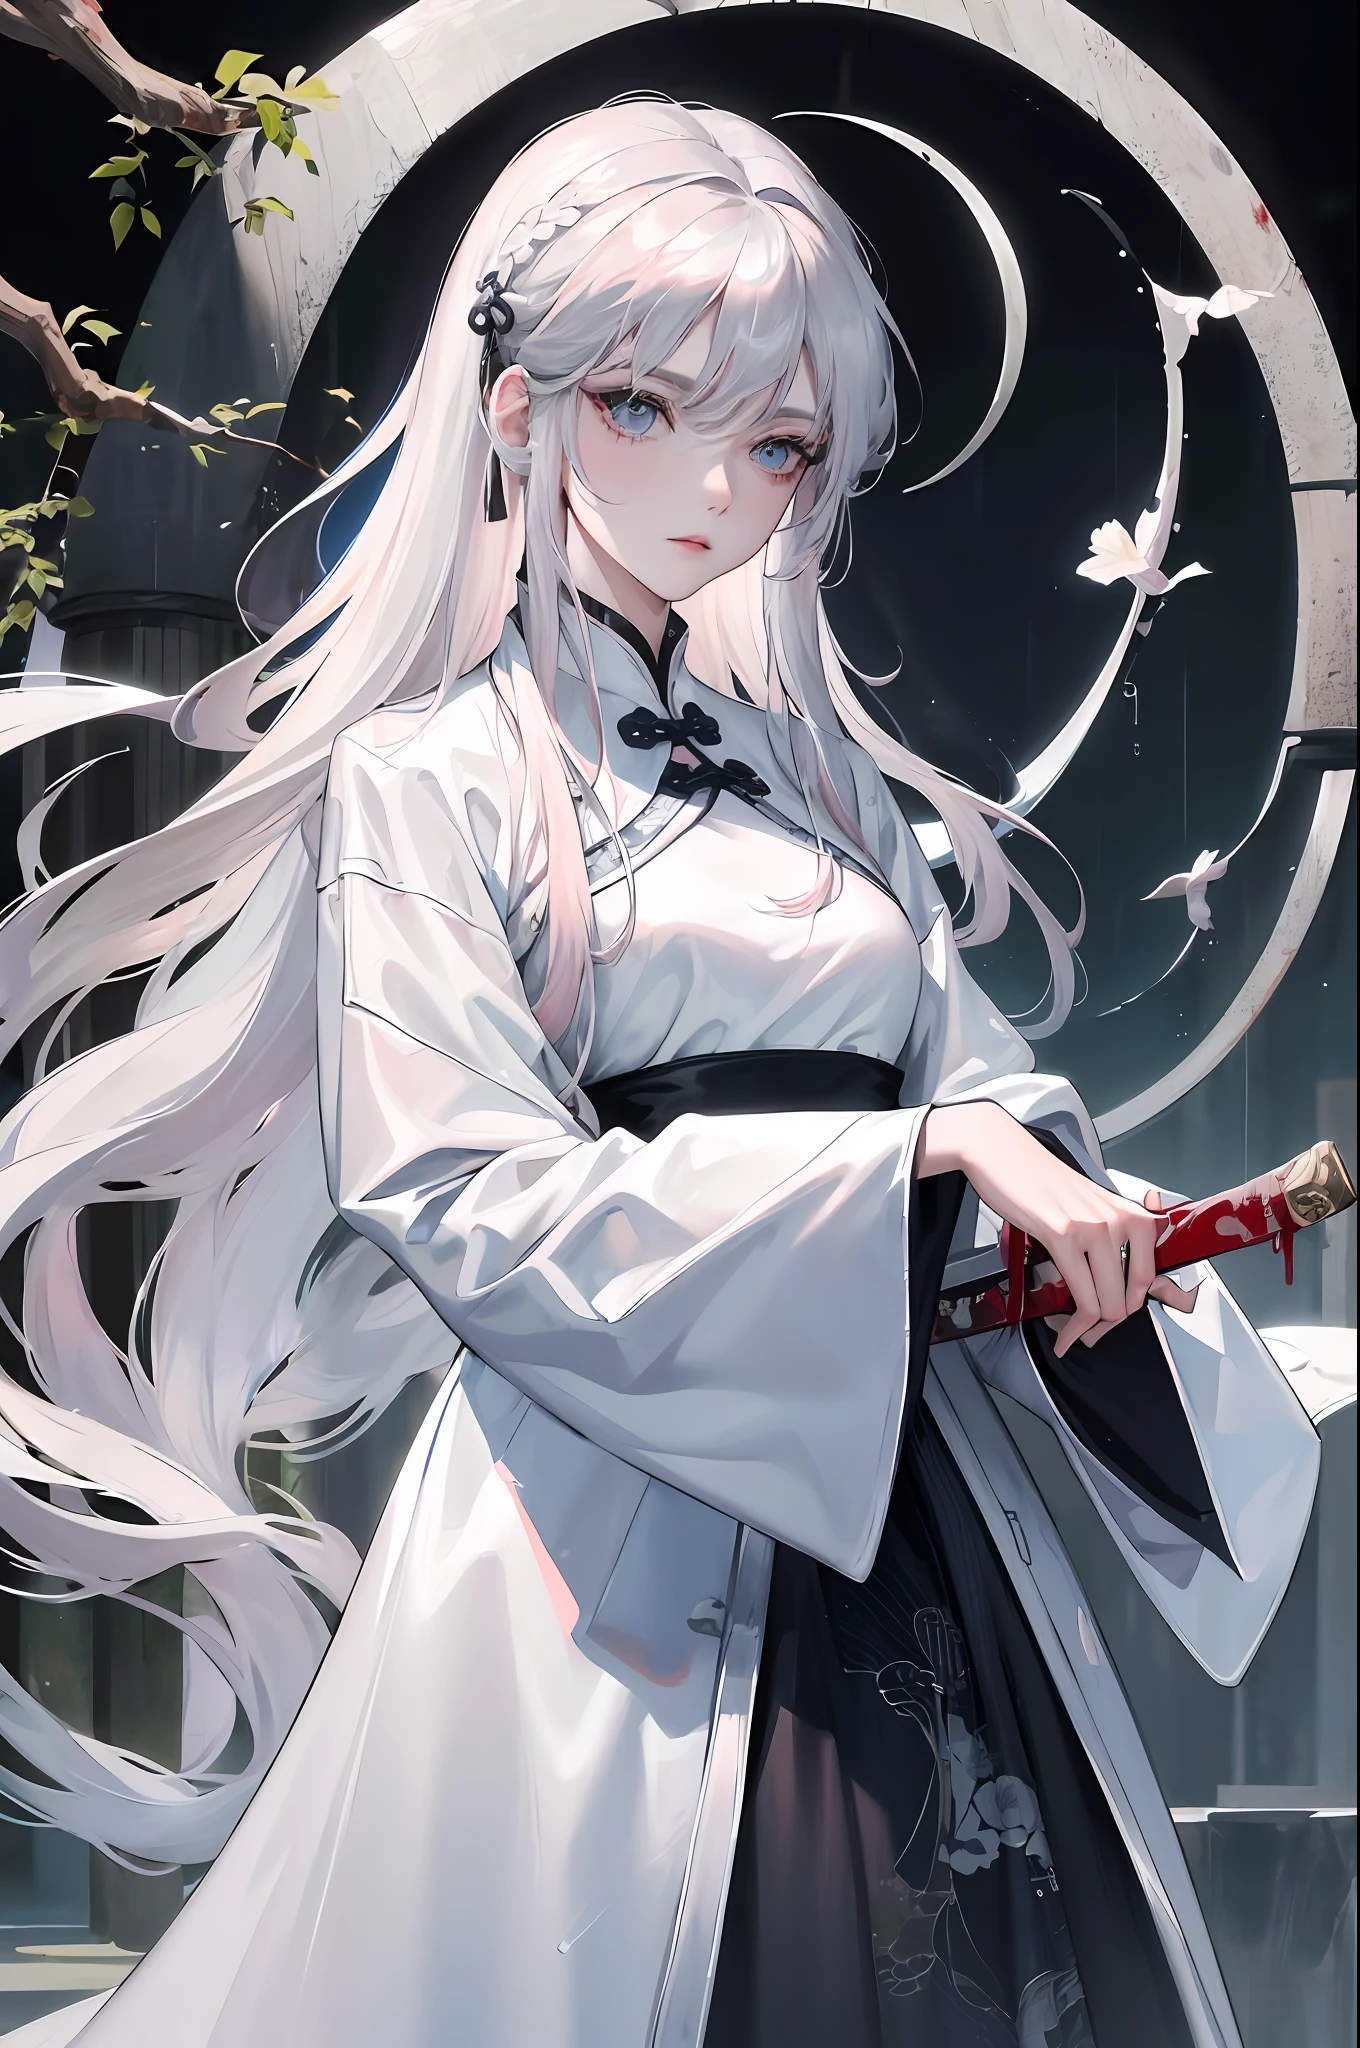 Masterpiece, Excellent, Night, Outdoor, Rainy Day, Branches, Chinese Style, Ancient China, 1 Woman, Mature Woman, Silver-White Long-Haired Woman, Gray-blue Eyes, Pale Pink Lips, Indifference, Seriousness, Bangs, Assassin, Sword, White Clothes, Black Clothes Patterns, Blood, Blood, Blood, Bloody Face,